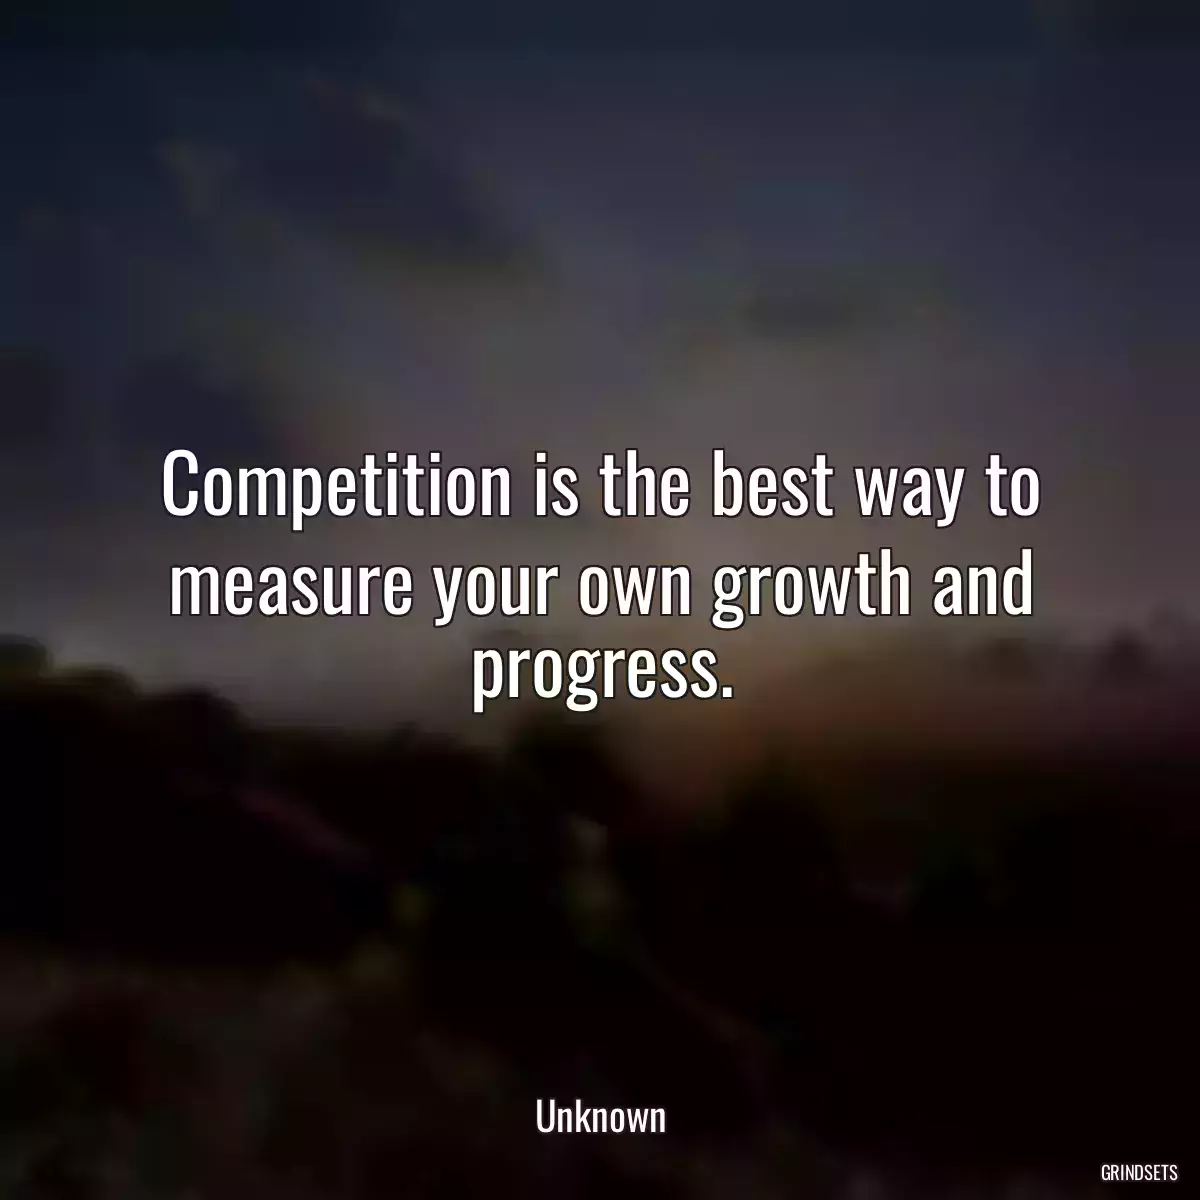 Competition is the best way to measure your own growth and progress.